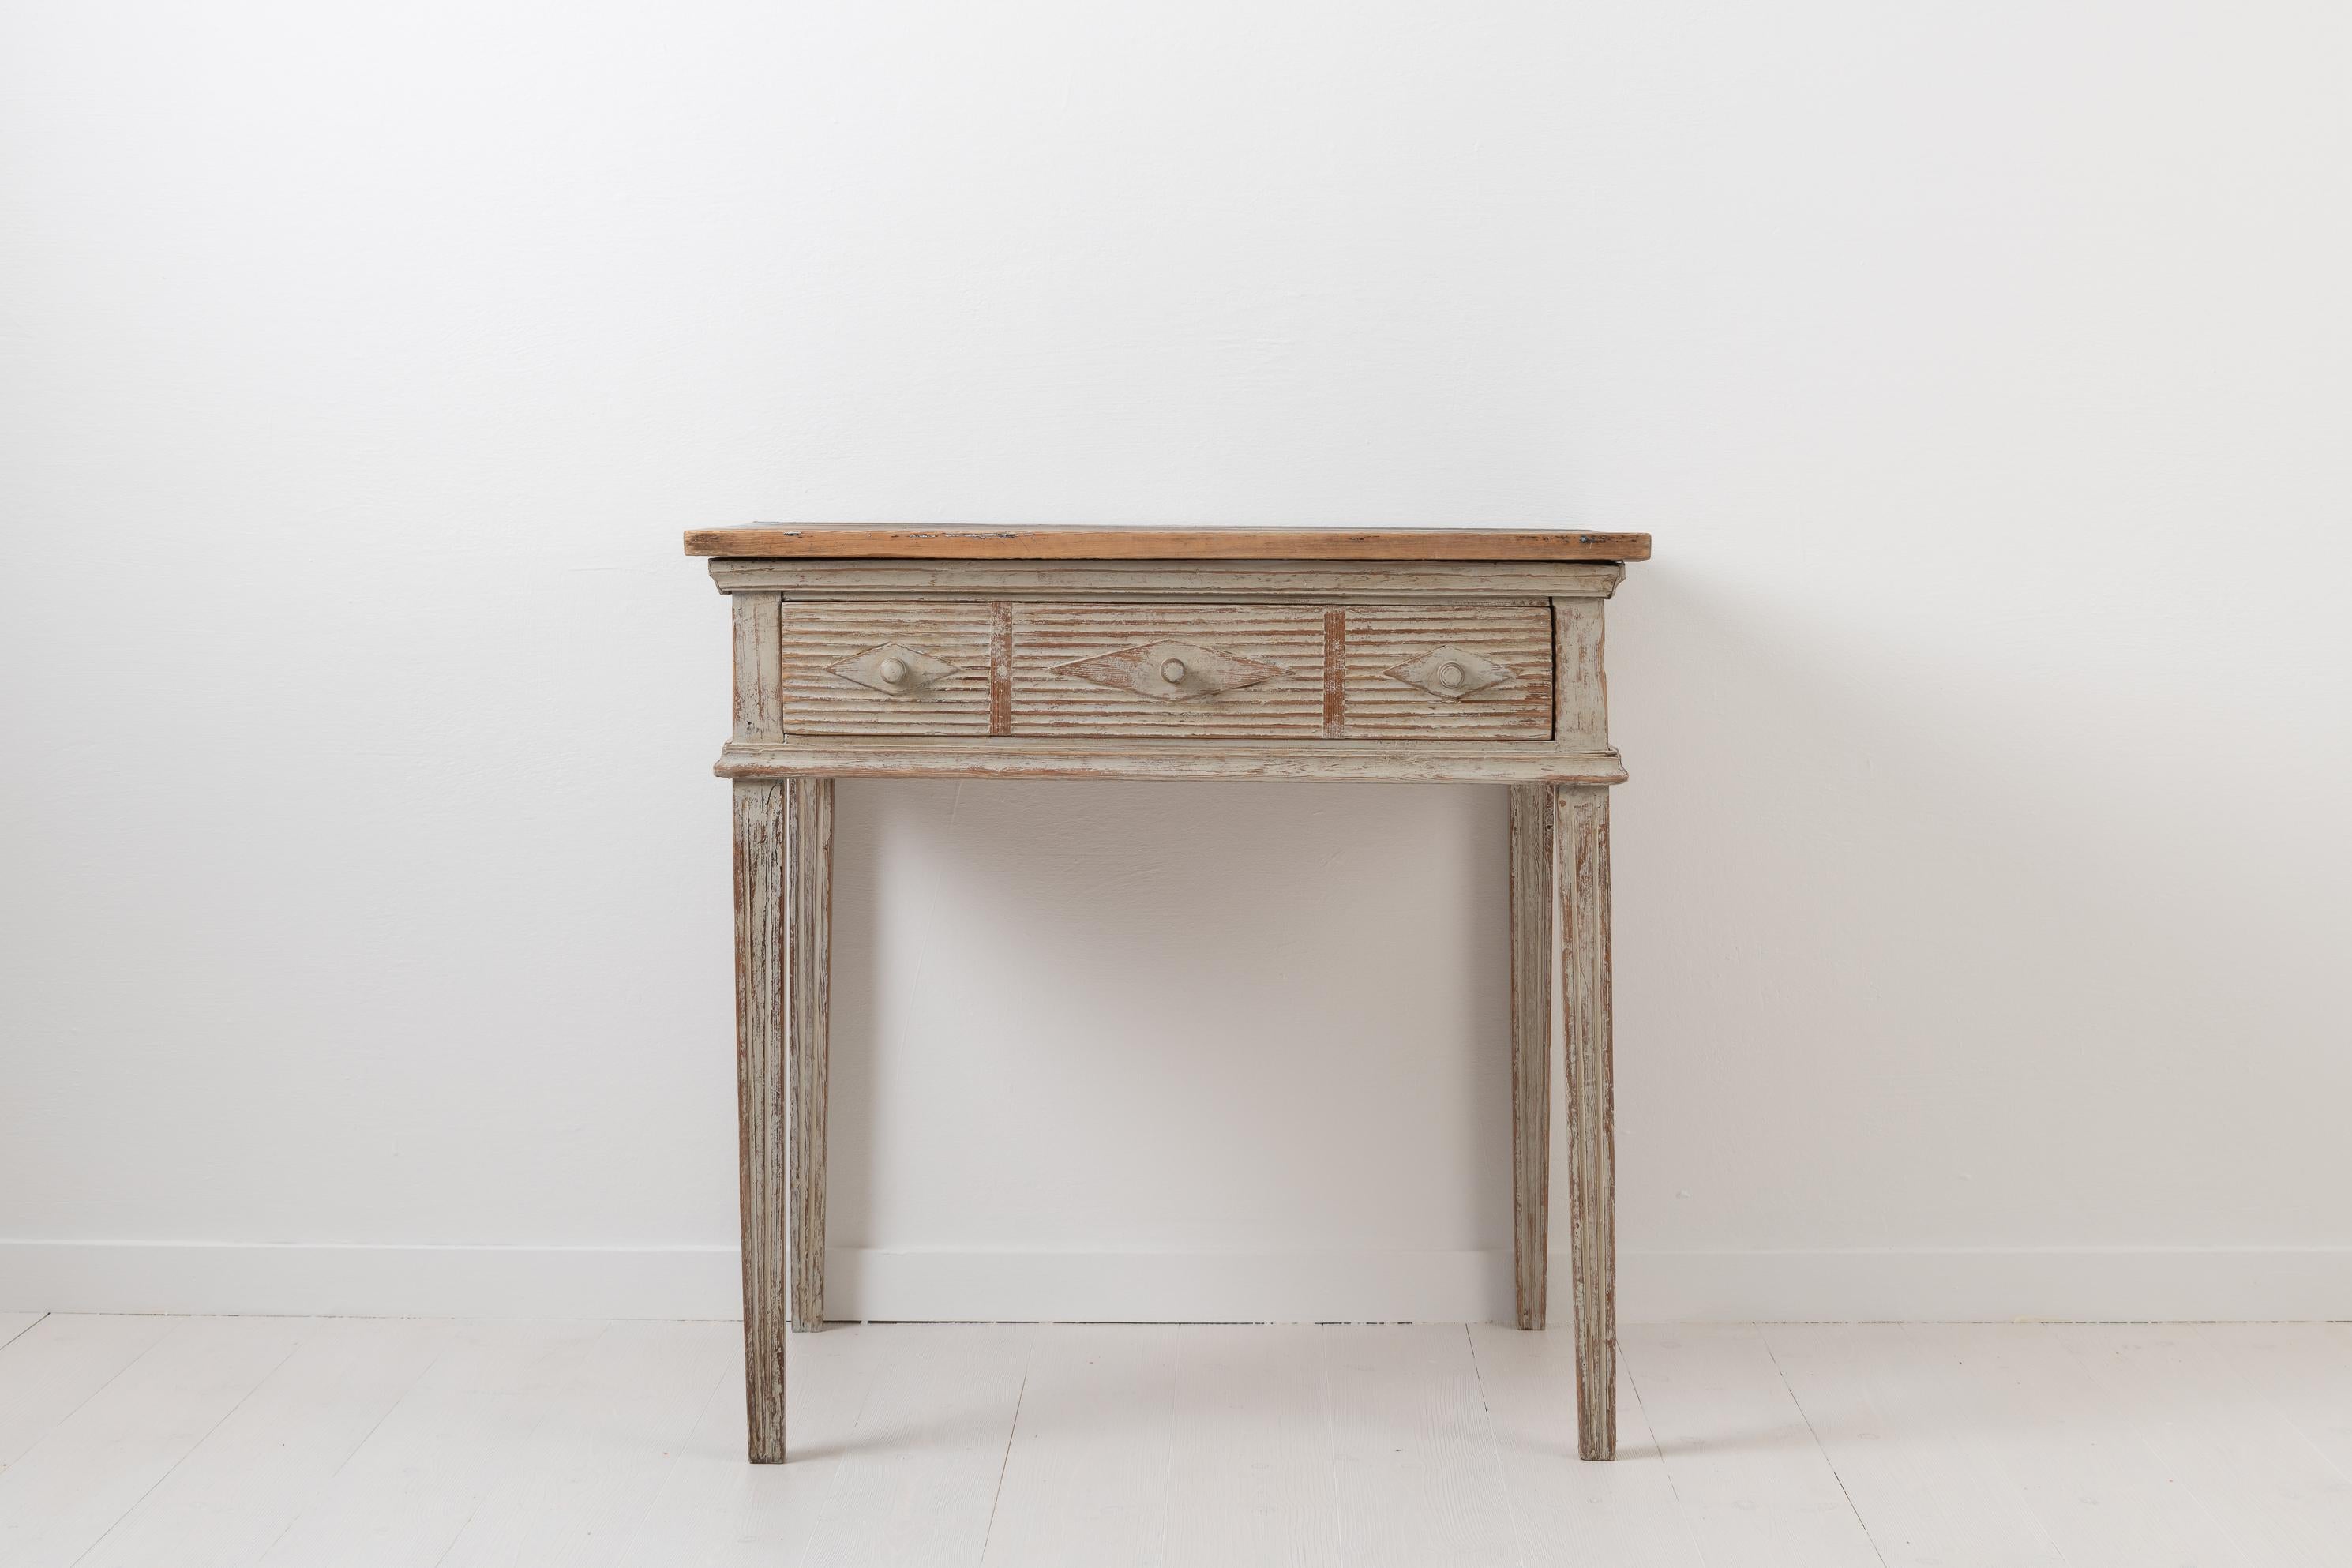 Hand-Crafted Swedish Gustavian Wall Table from 1790